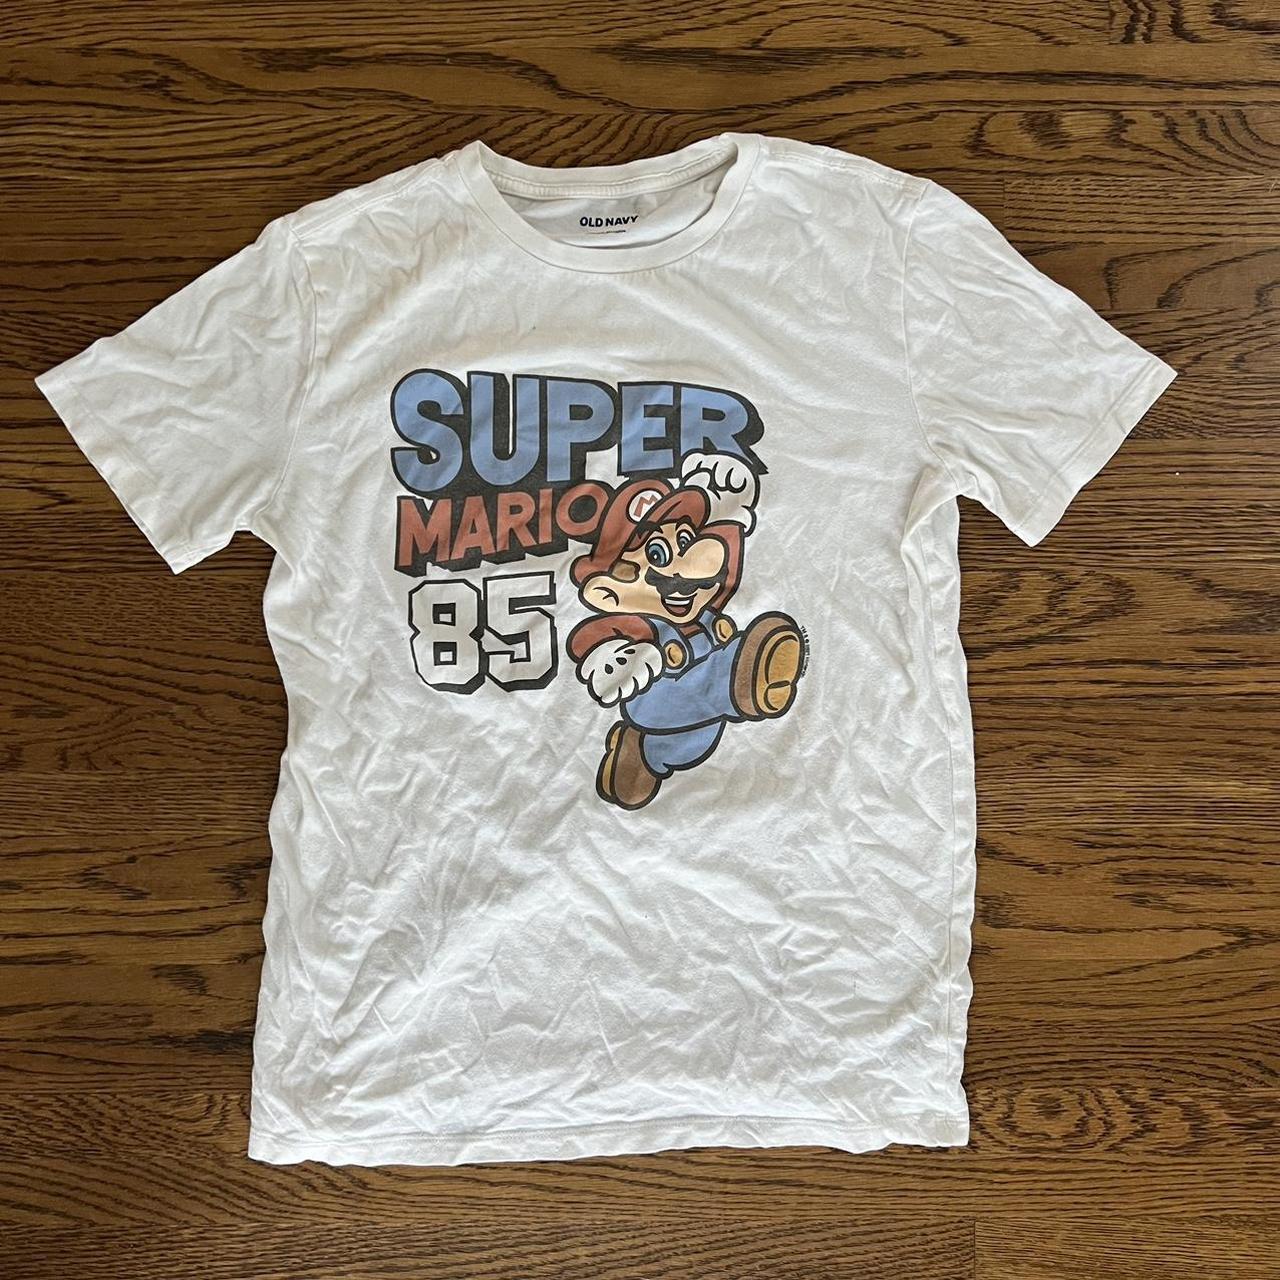 Super Mario Bros graphic t Size small fits well... - Depop